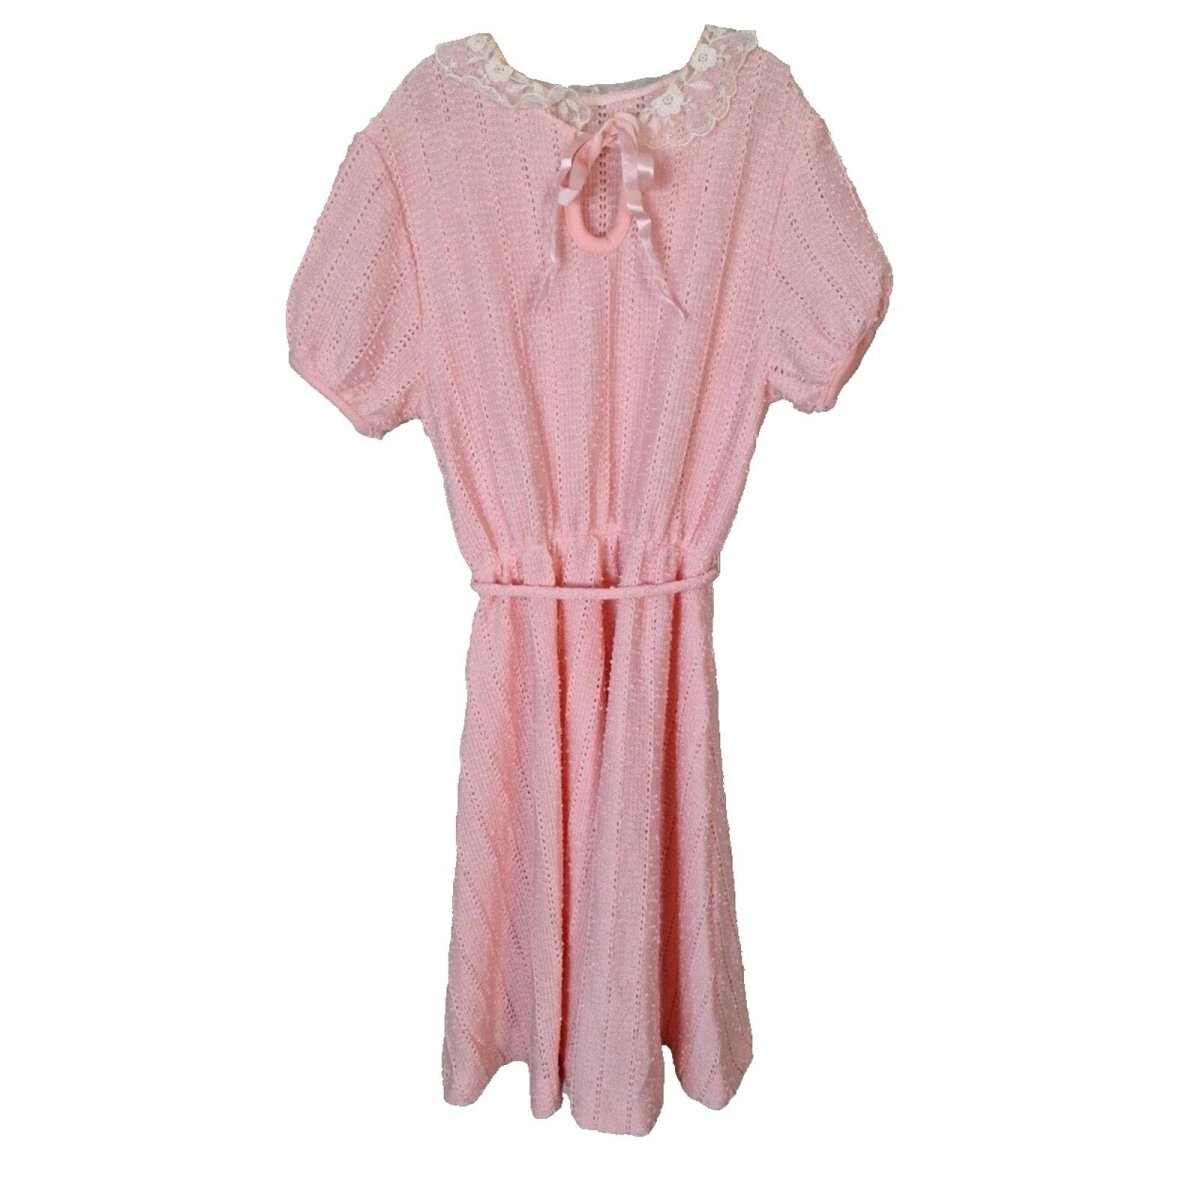 Vintage 70s/80s Pink Knit Lace Collar Dress Girls Size 6/8 Please Check Measurements - themallvintage The Mall Vintage